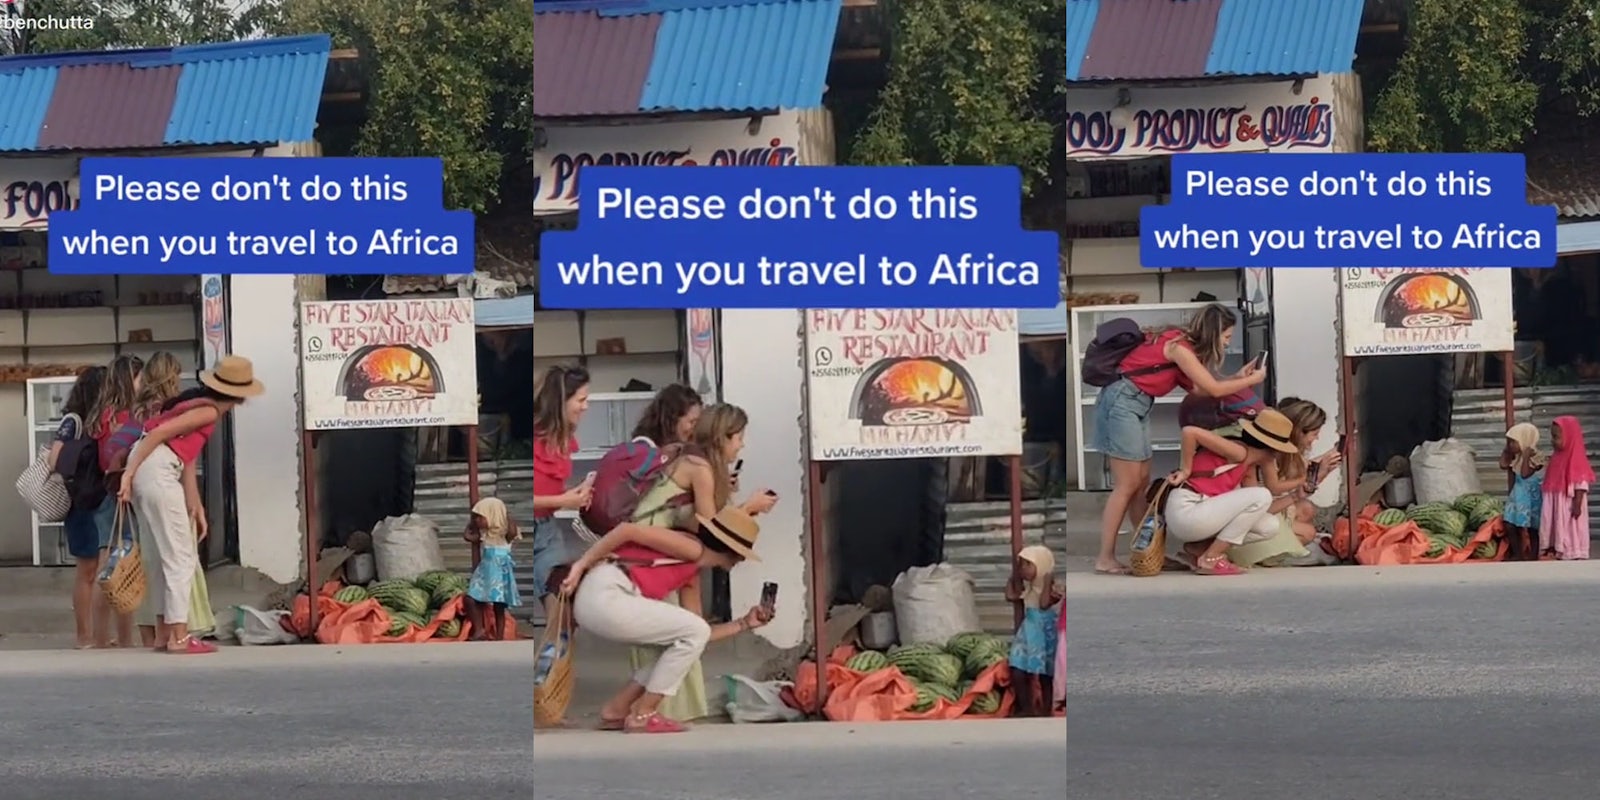 group of female tourists looking at two African children caption ' Please don't do this when you travel to Africa (l) group of female tourists squatting down to photograph the African children caption ' Please don't do this when you travel to Africa' (c) group female tourists taking photos of two African children caption ' Please don't do this when you travel to Africa' (r)